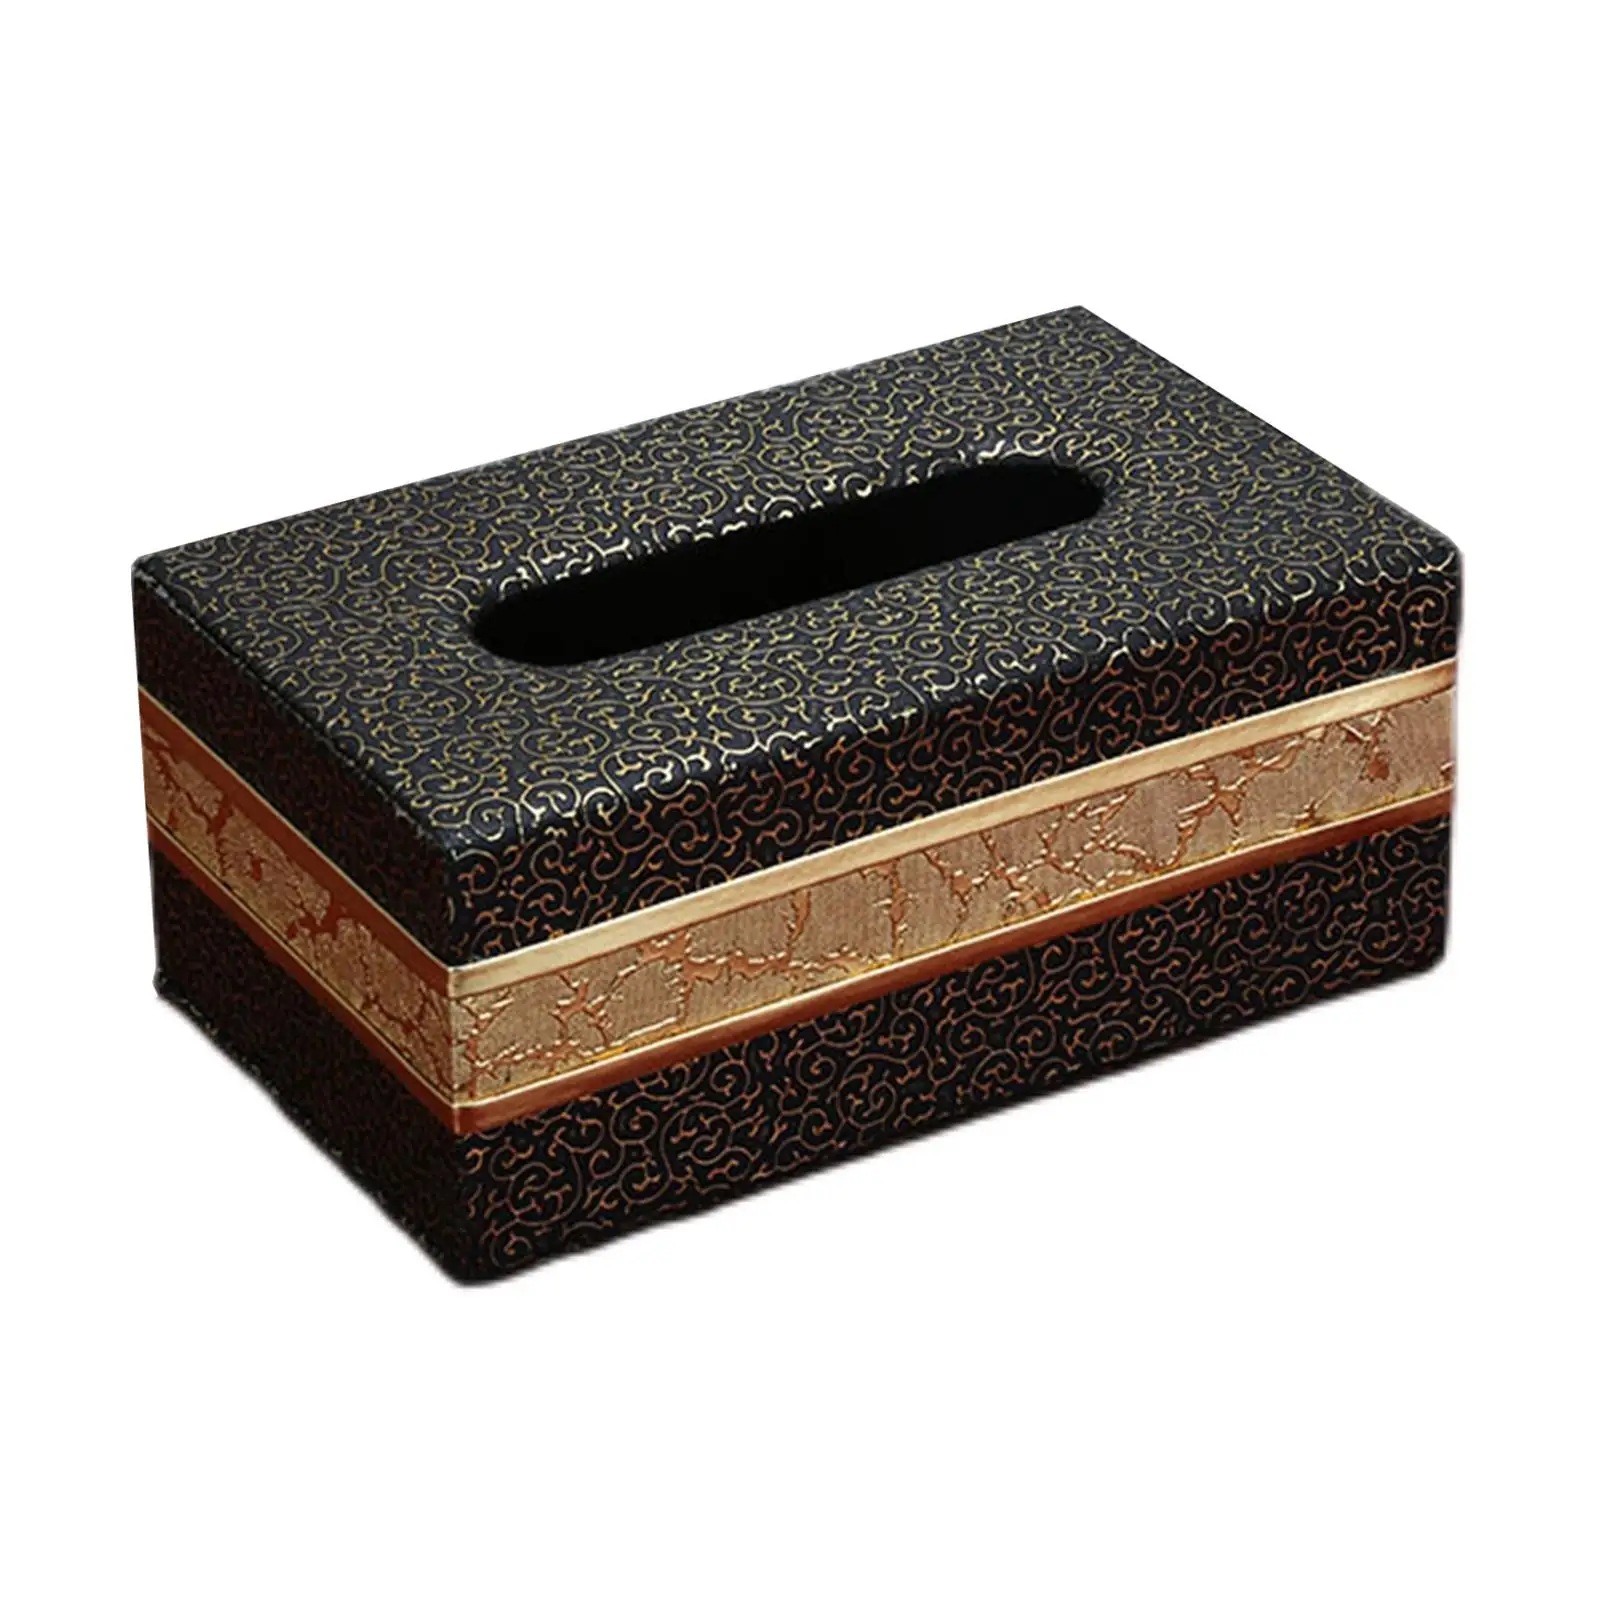 Stylish PU Leather Tissue Box Holder Organizer Rectangular Tissue Box Cover for Hotel Vanity Countertop Home Table Decor